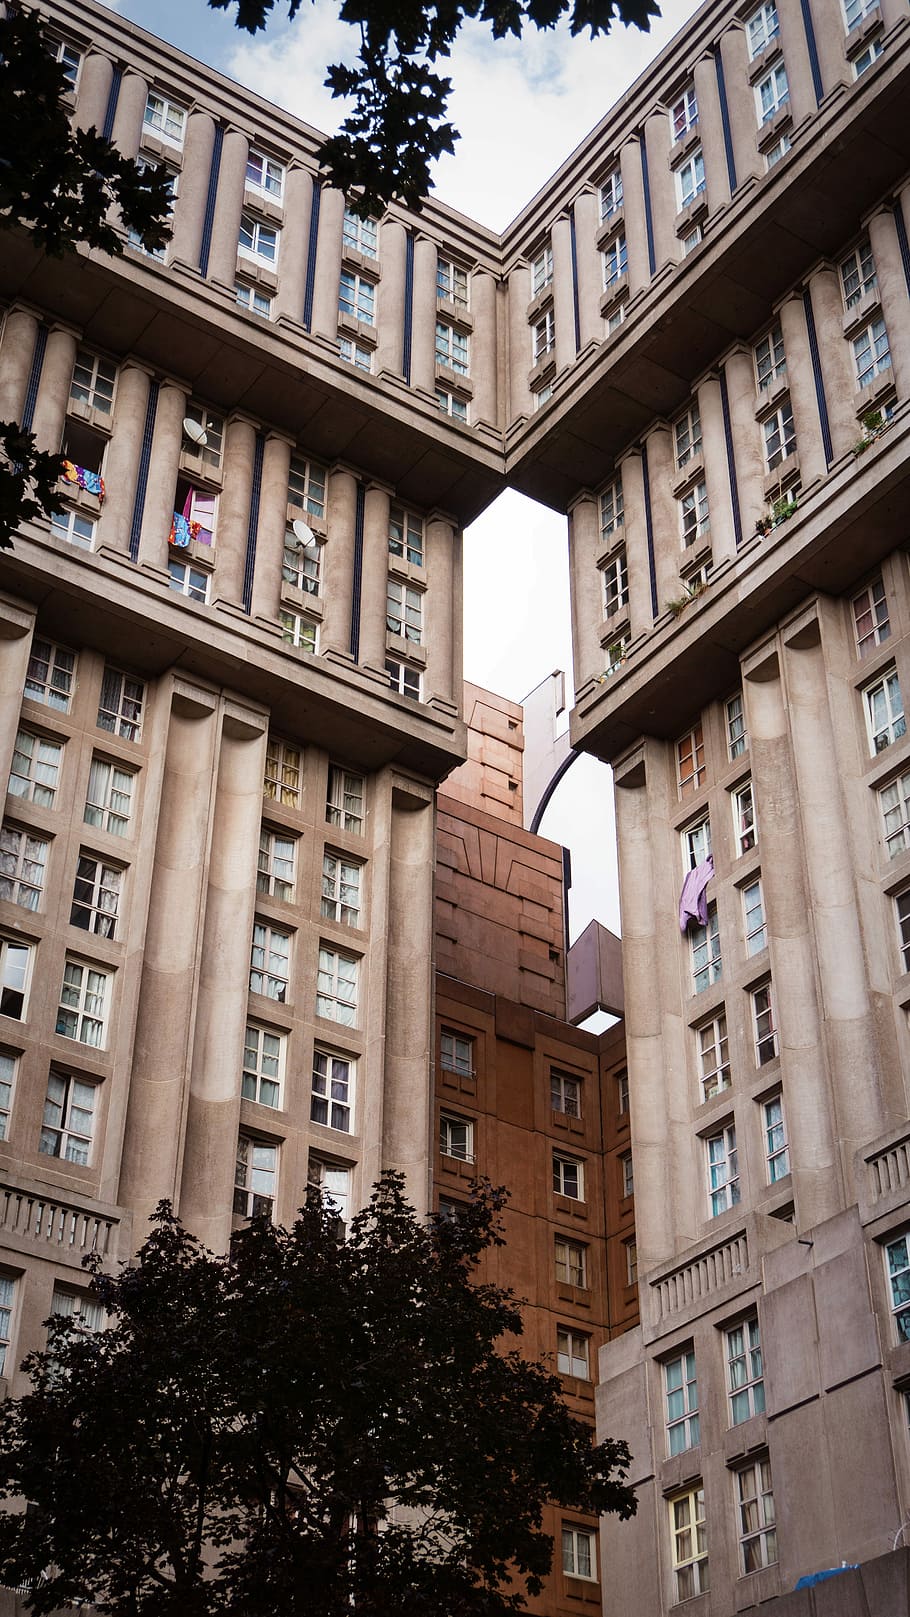 Espaces d’Abraxas, by Ricardo Bofill - 1983, brown apartment type building during daytime